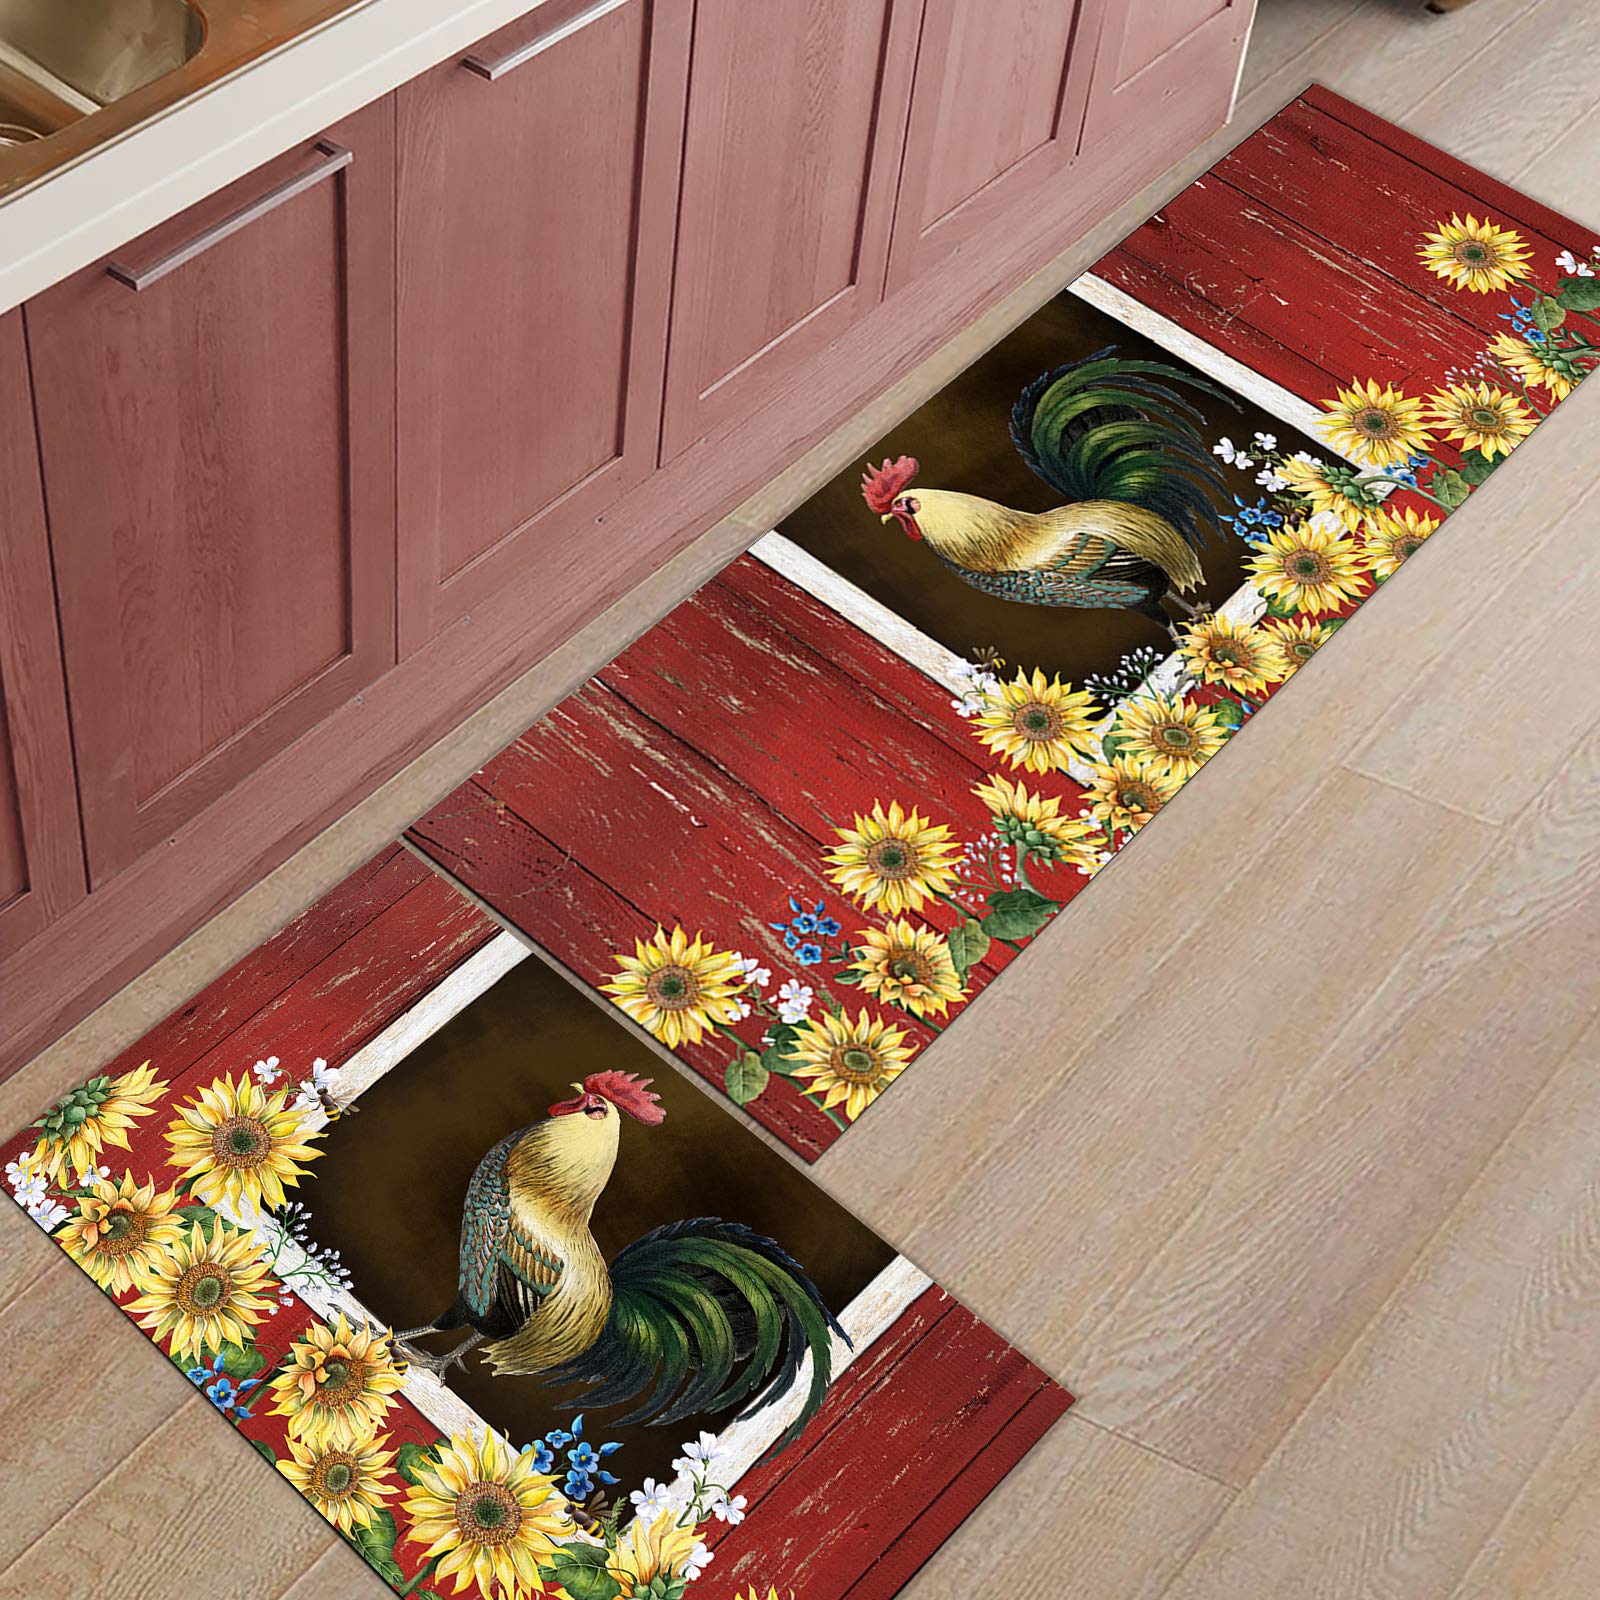 Kitchen Rugs Sets 2 Piece Floor Mats Sunflower Farmhouse Rooster Red Wood Grain Durable Doormat Non-Slip Rubber Backing Area Rugs Washable Carpet Inside Door Mat Pad Sets-23.6" x 35.4"+23.6" x 70.9"